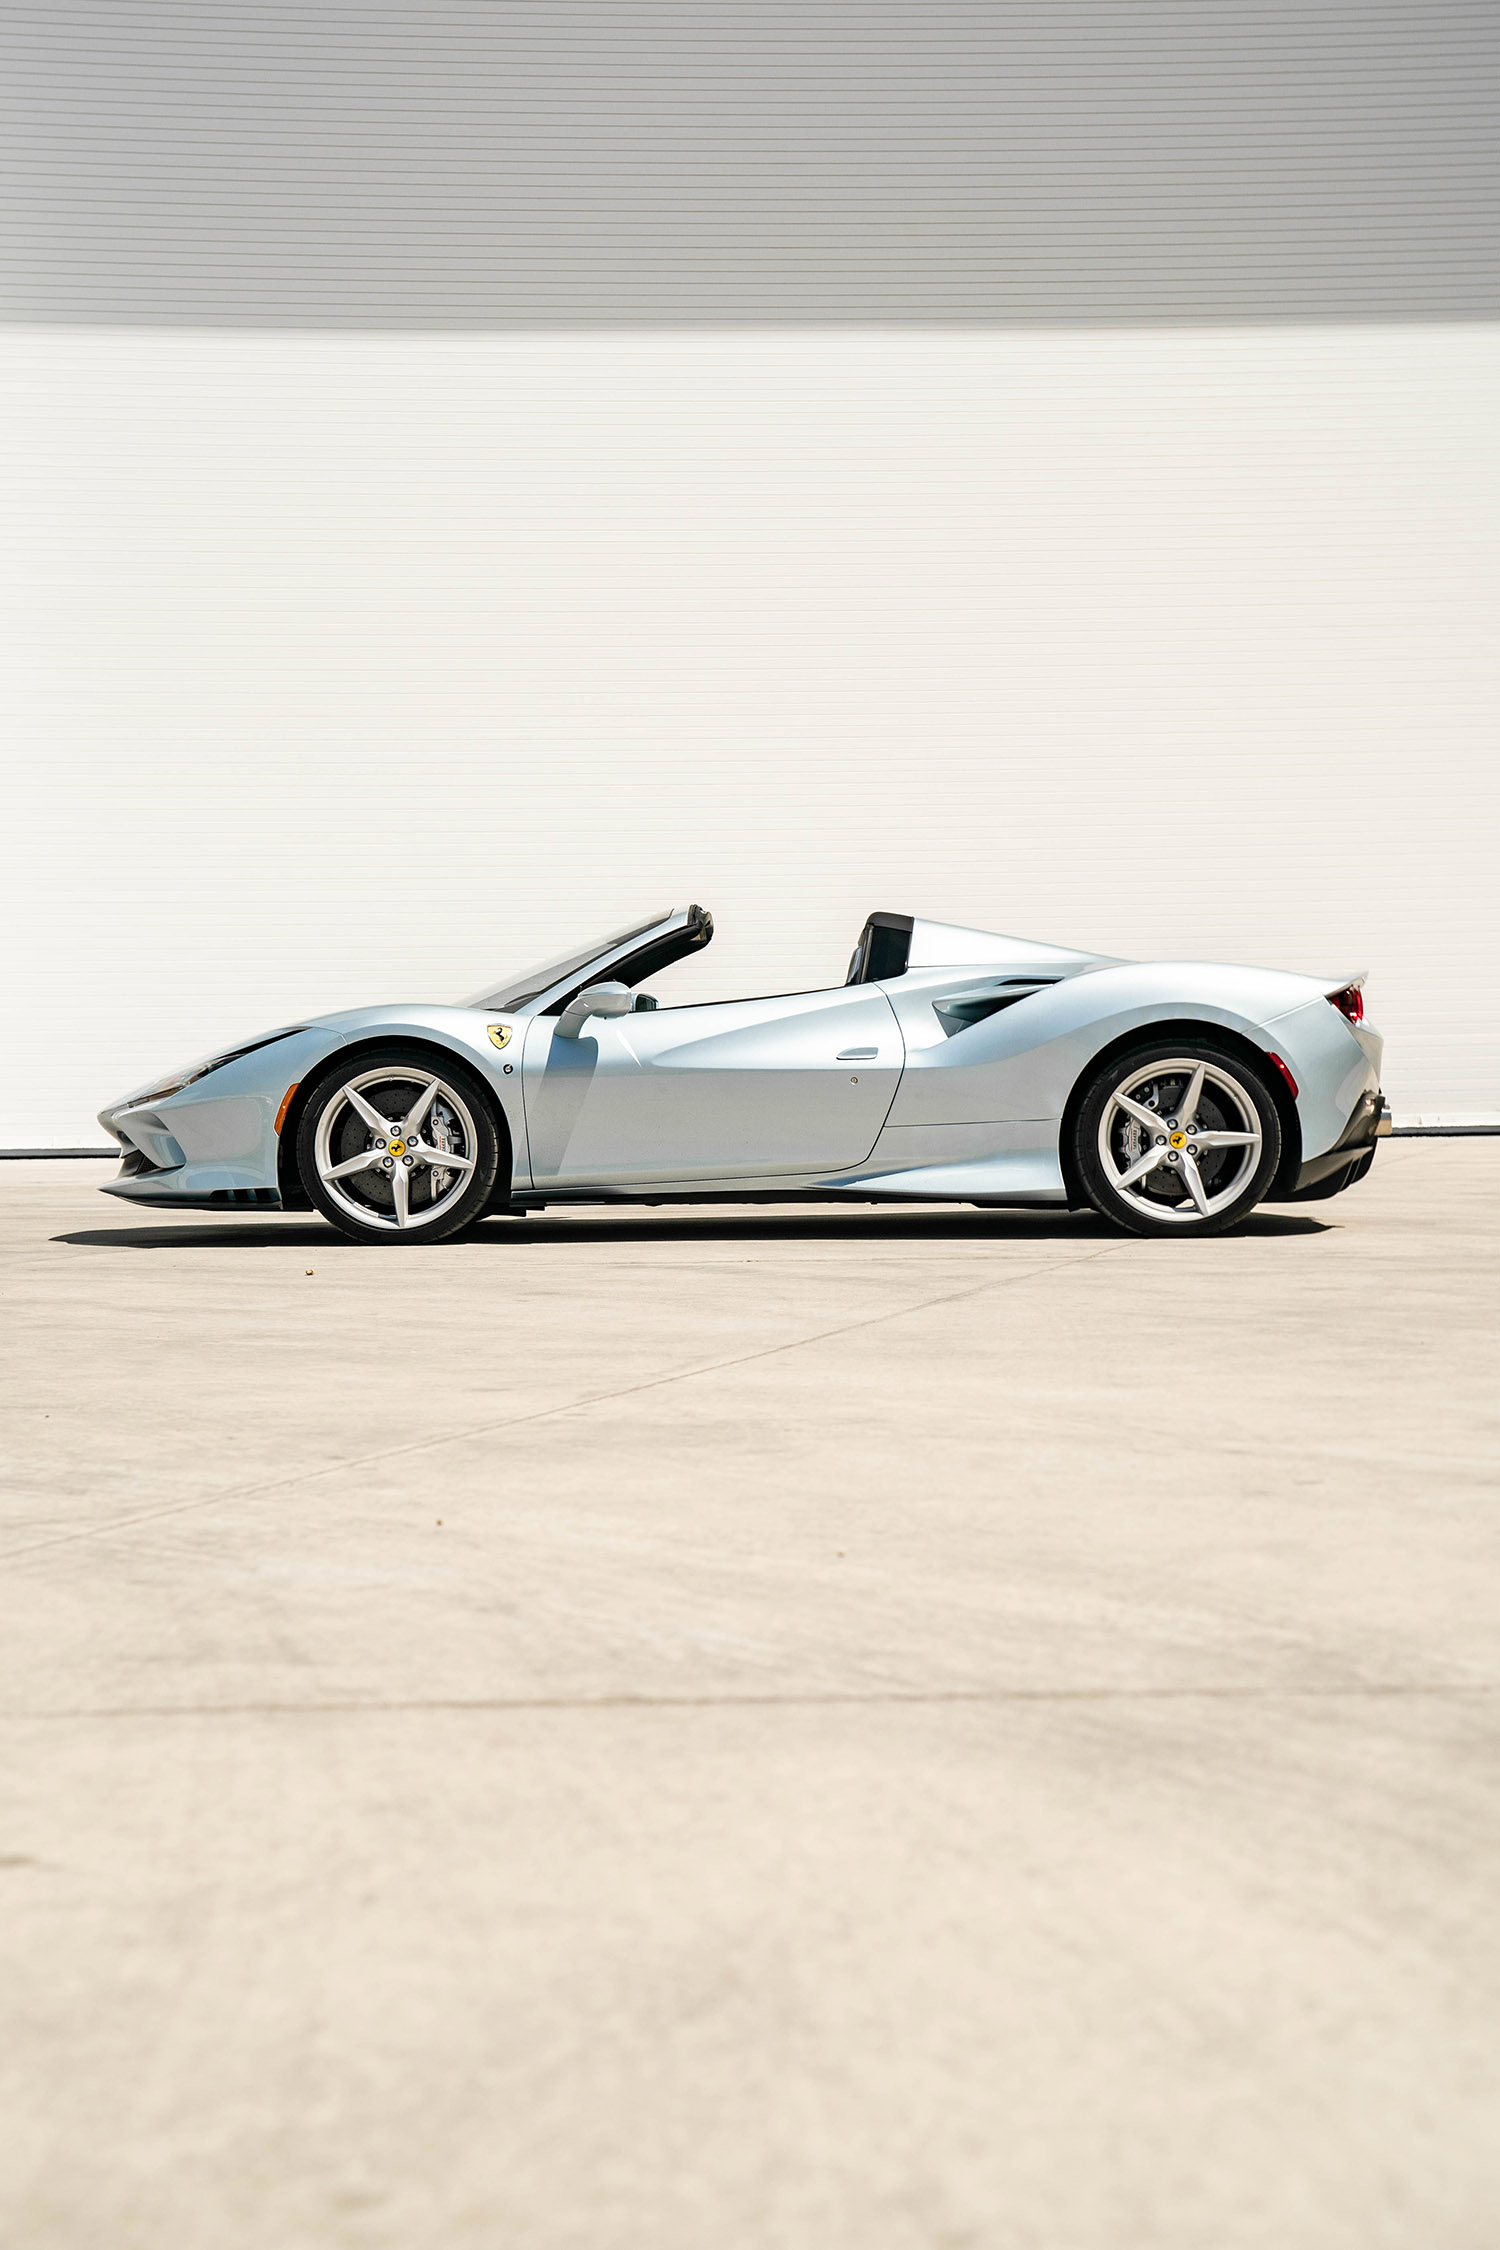 2018 Ferrari 488 GTB Review: Easy-To-Drive Supercar Great For